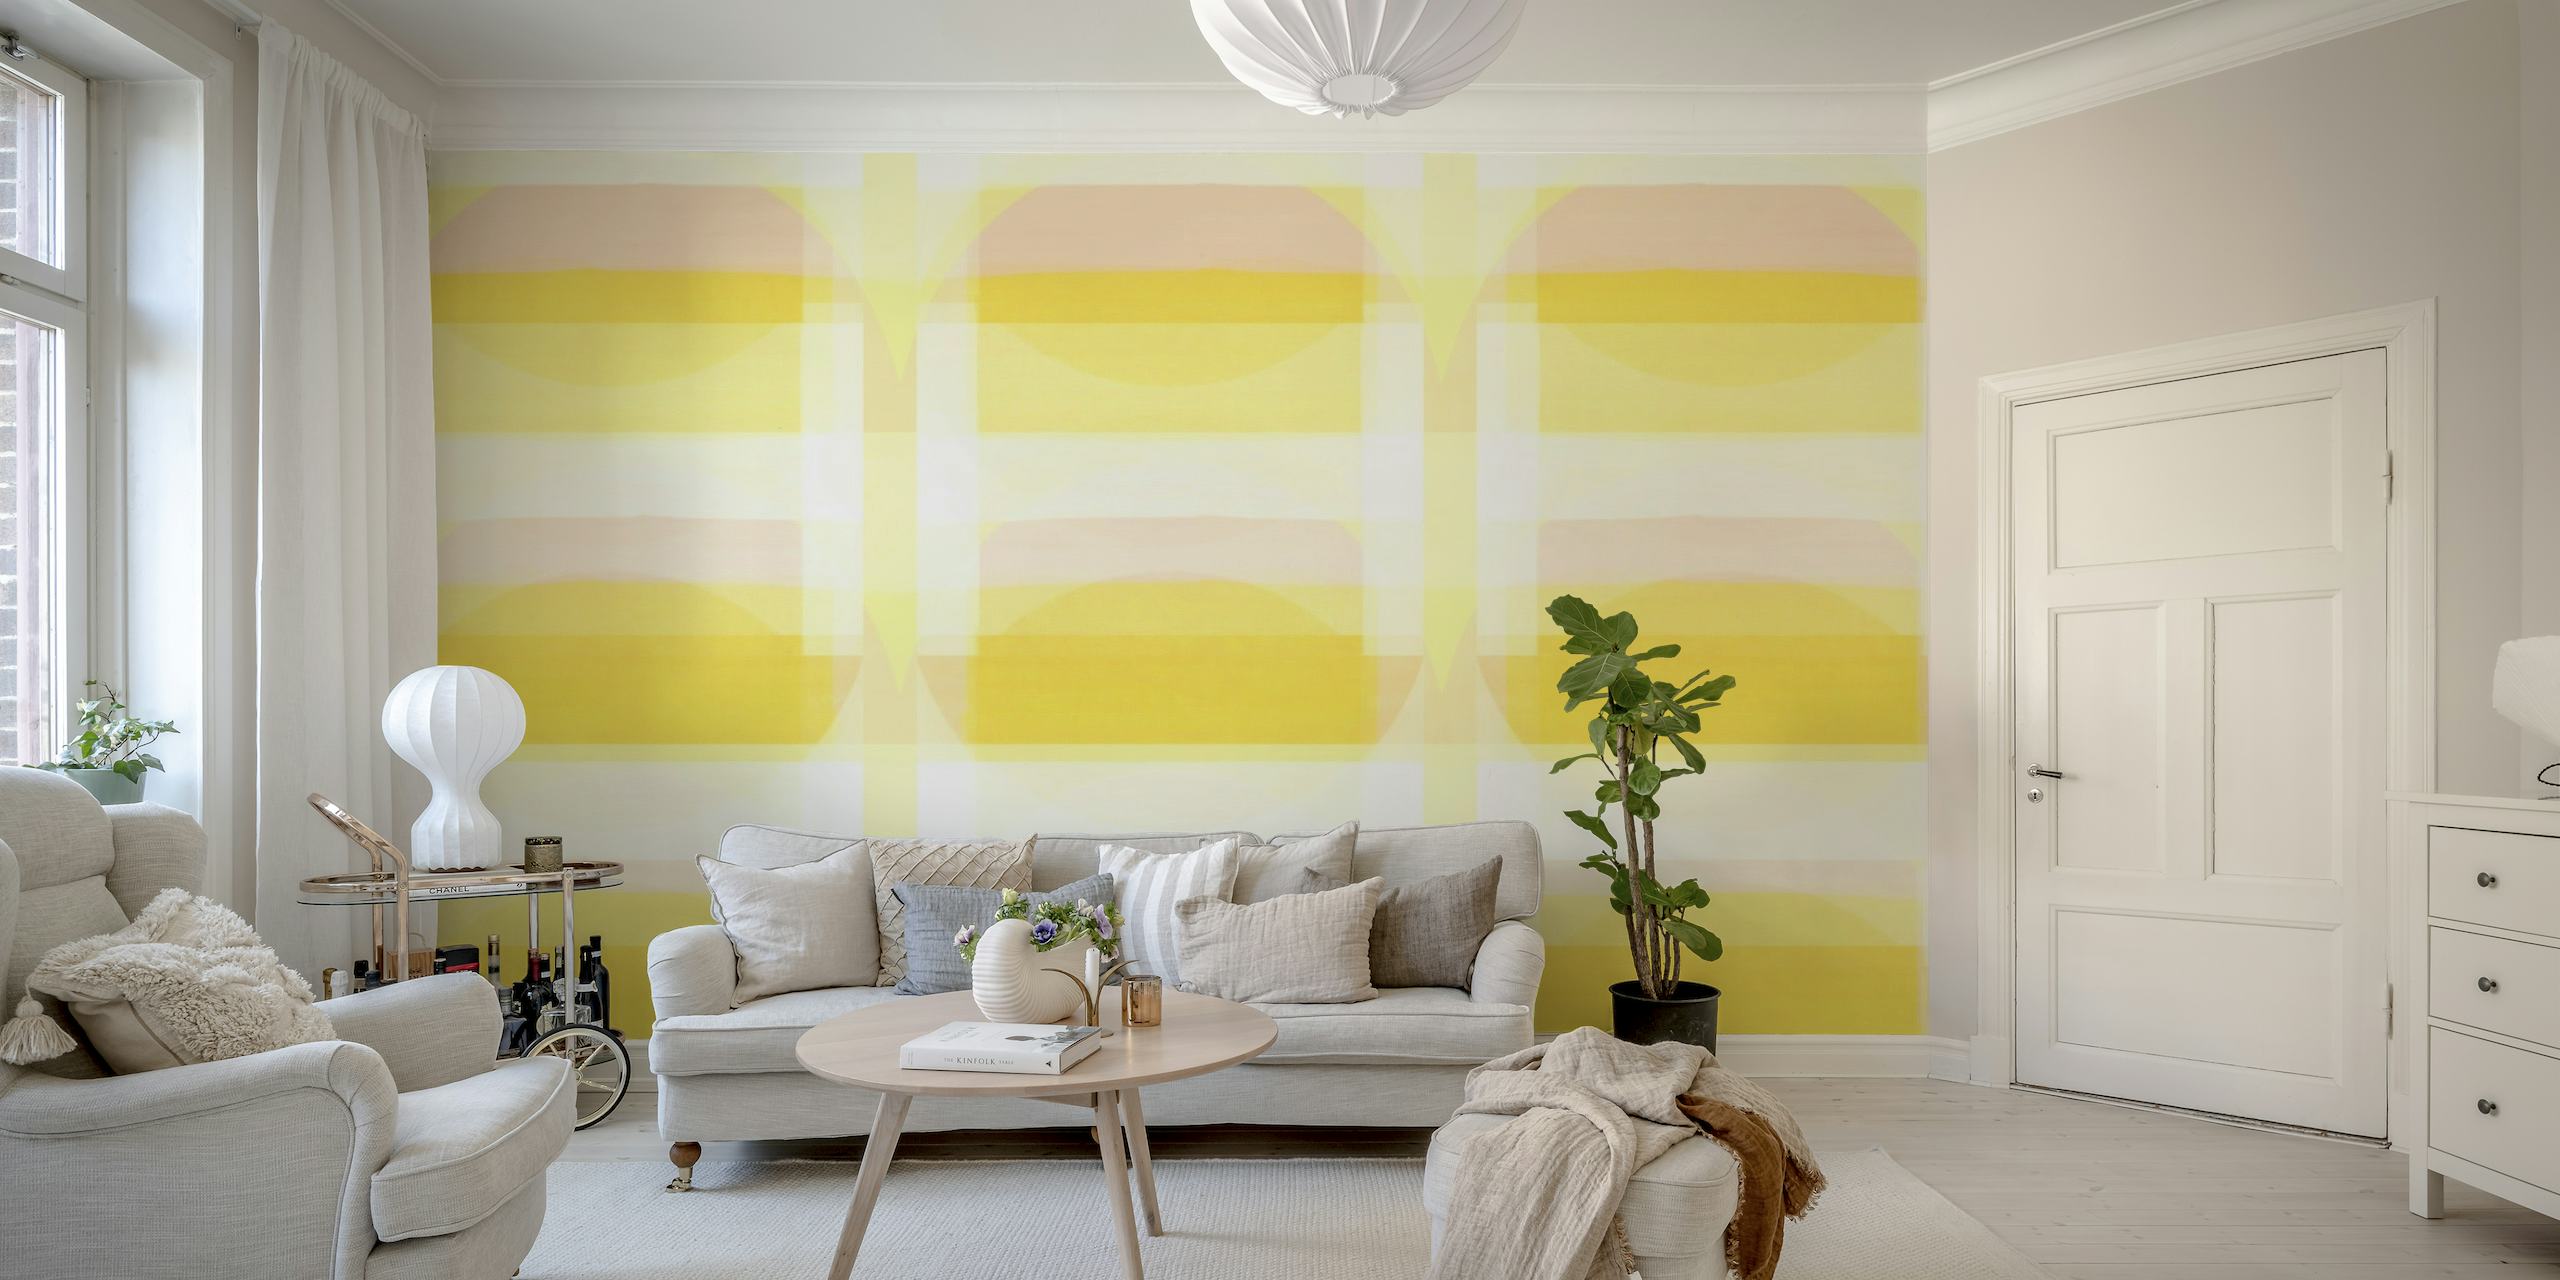 Sunny Bauhaus geometric pattern wall mural in pastel yellow and white